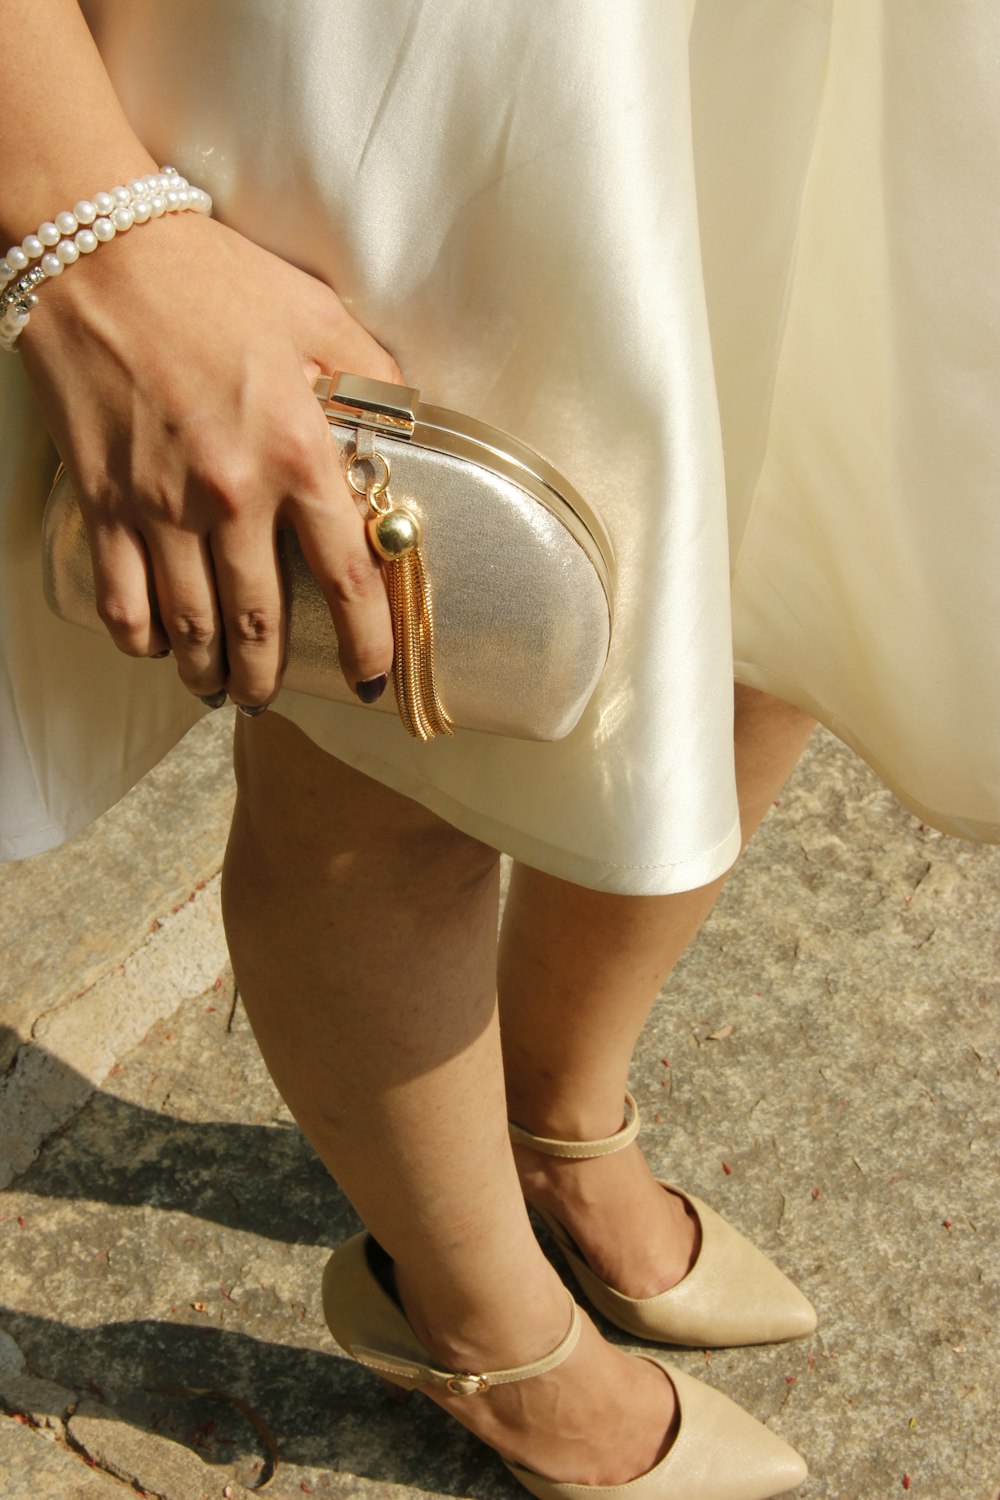 a close up of a person holding a purse